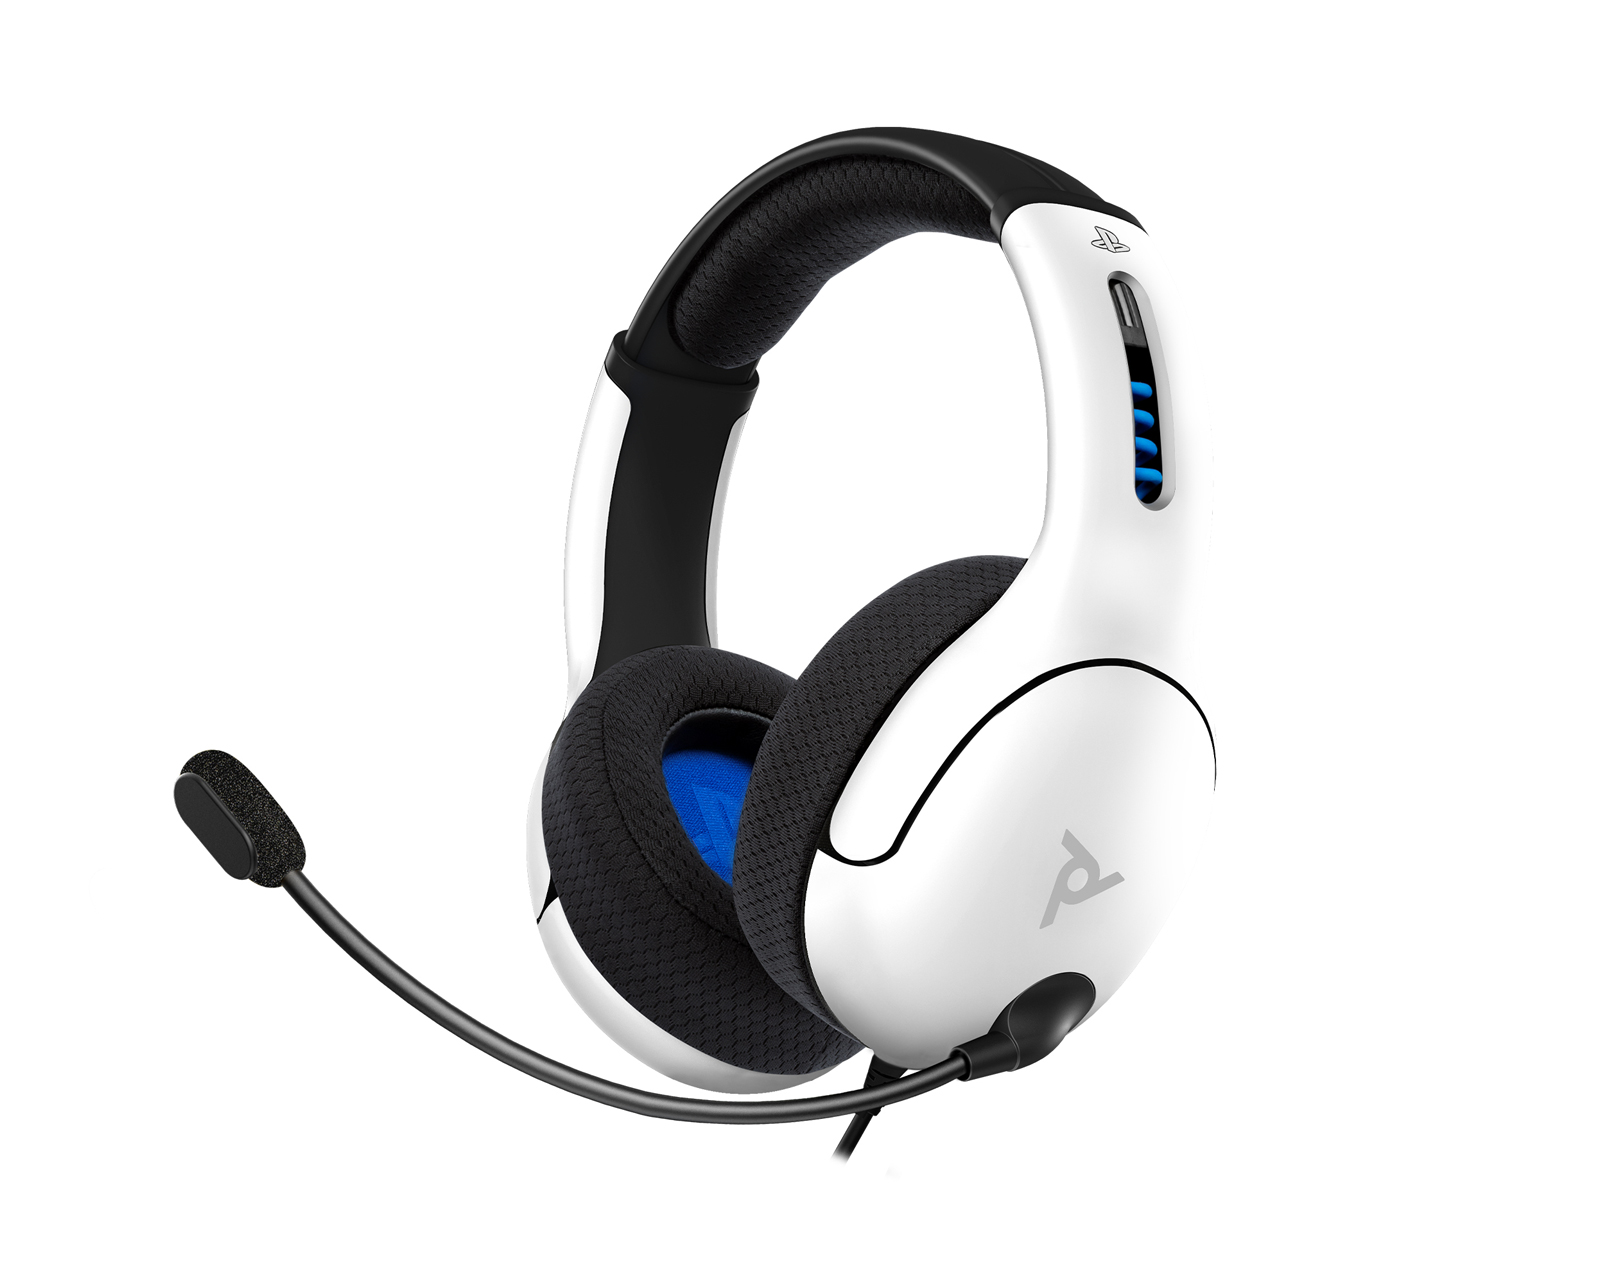 PDP Gaming Wired Chat White Headset LVL30 Official PlayStation PS4 PS5  Product